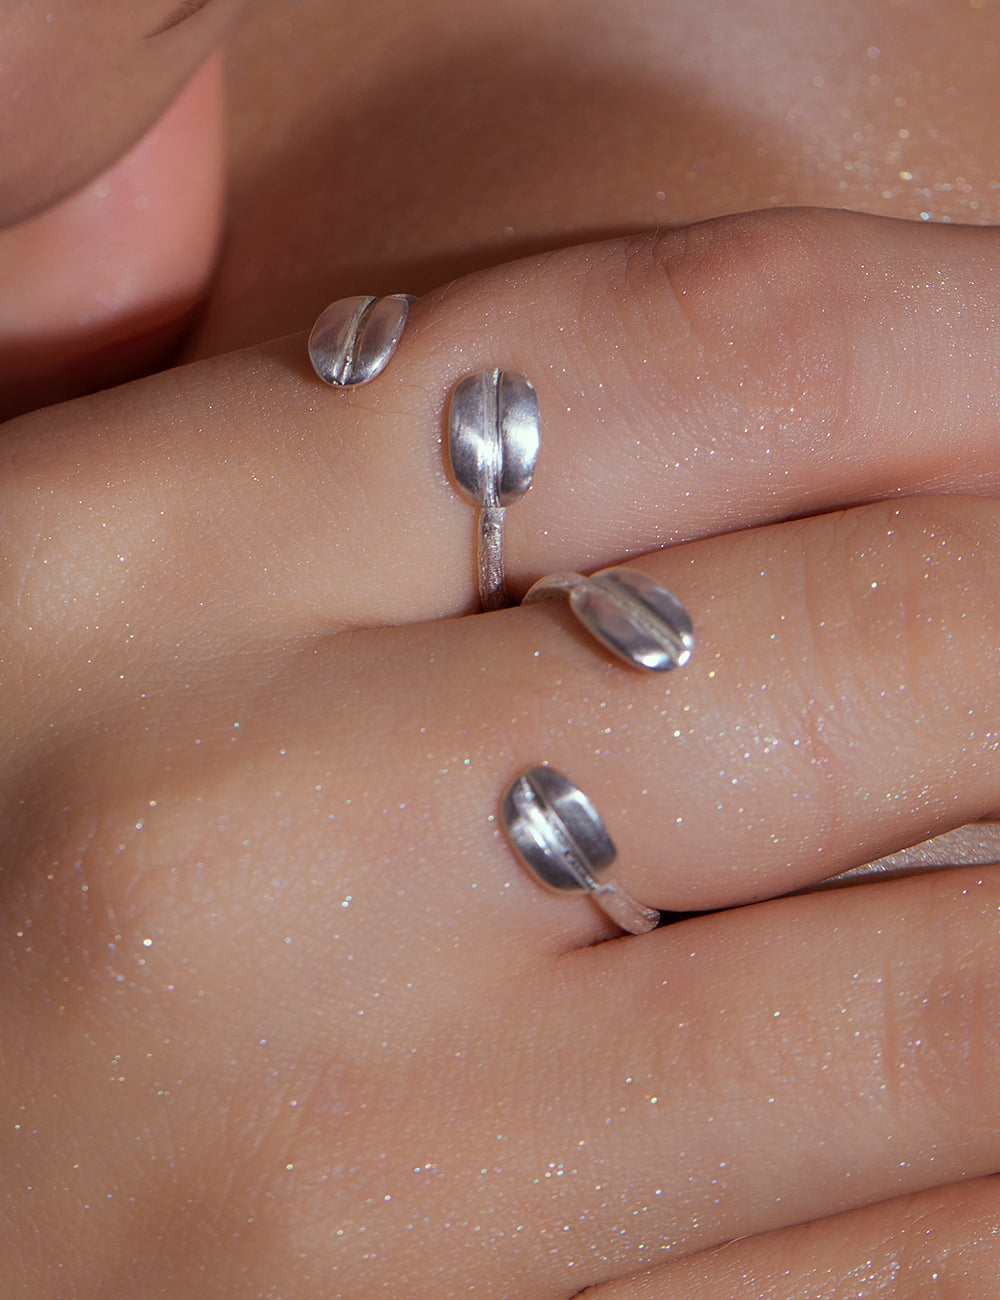 Silver Double Bean Ring